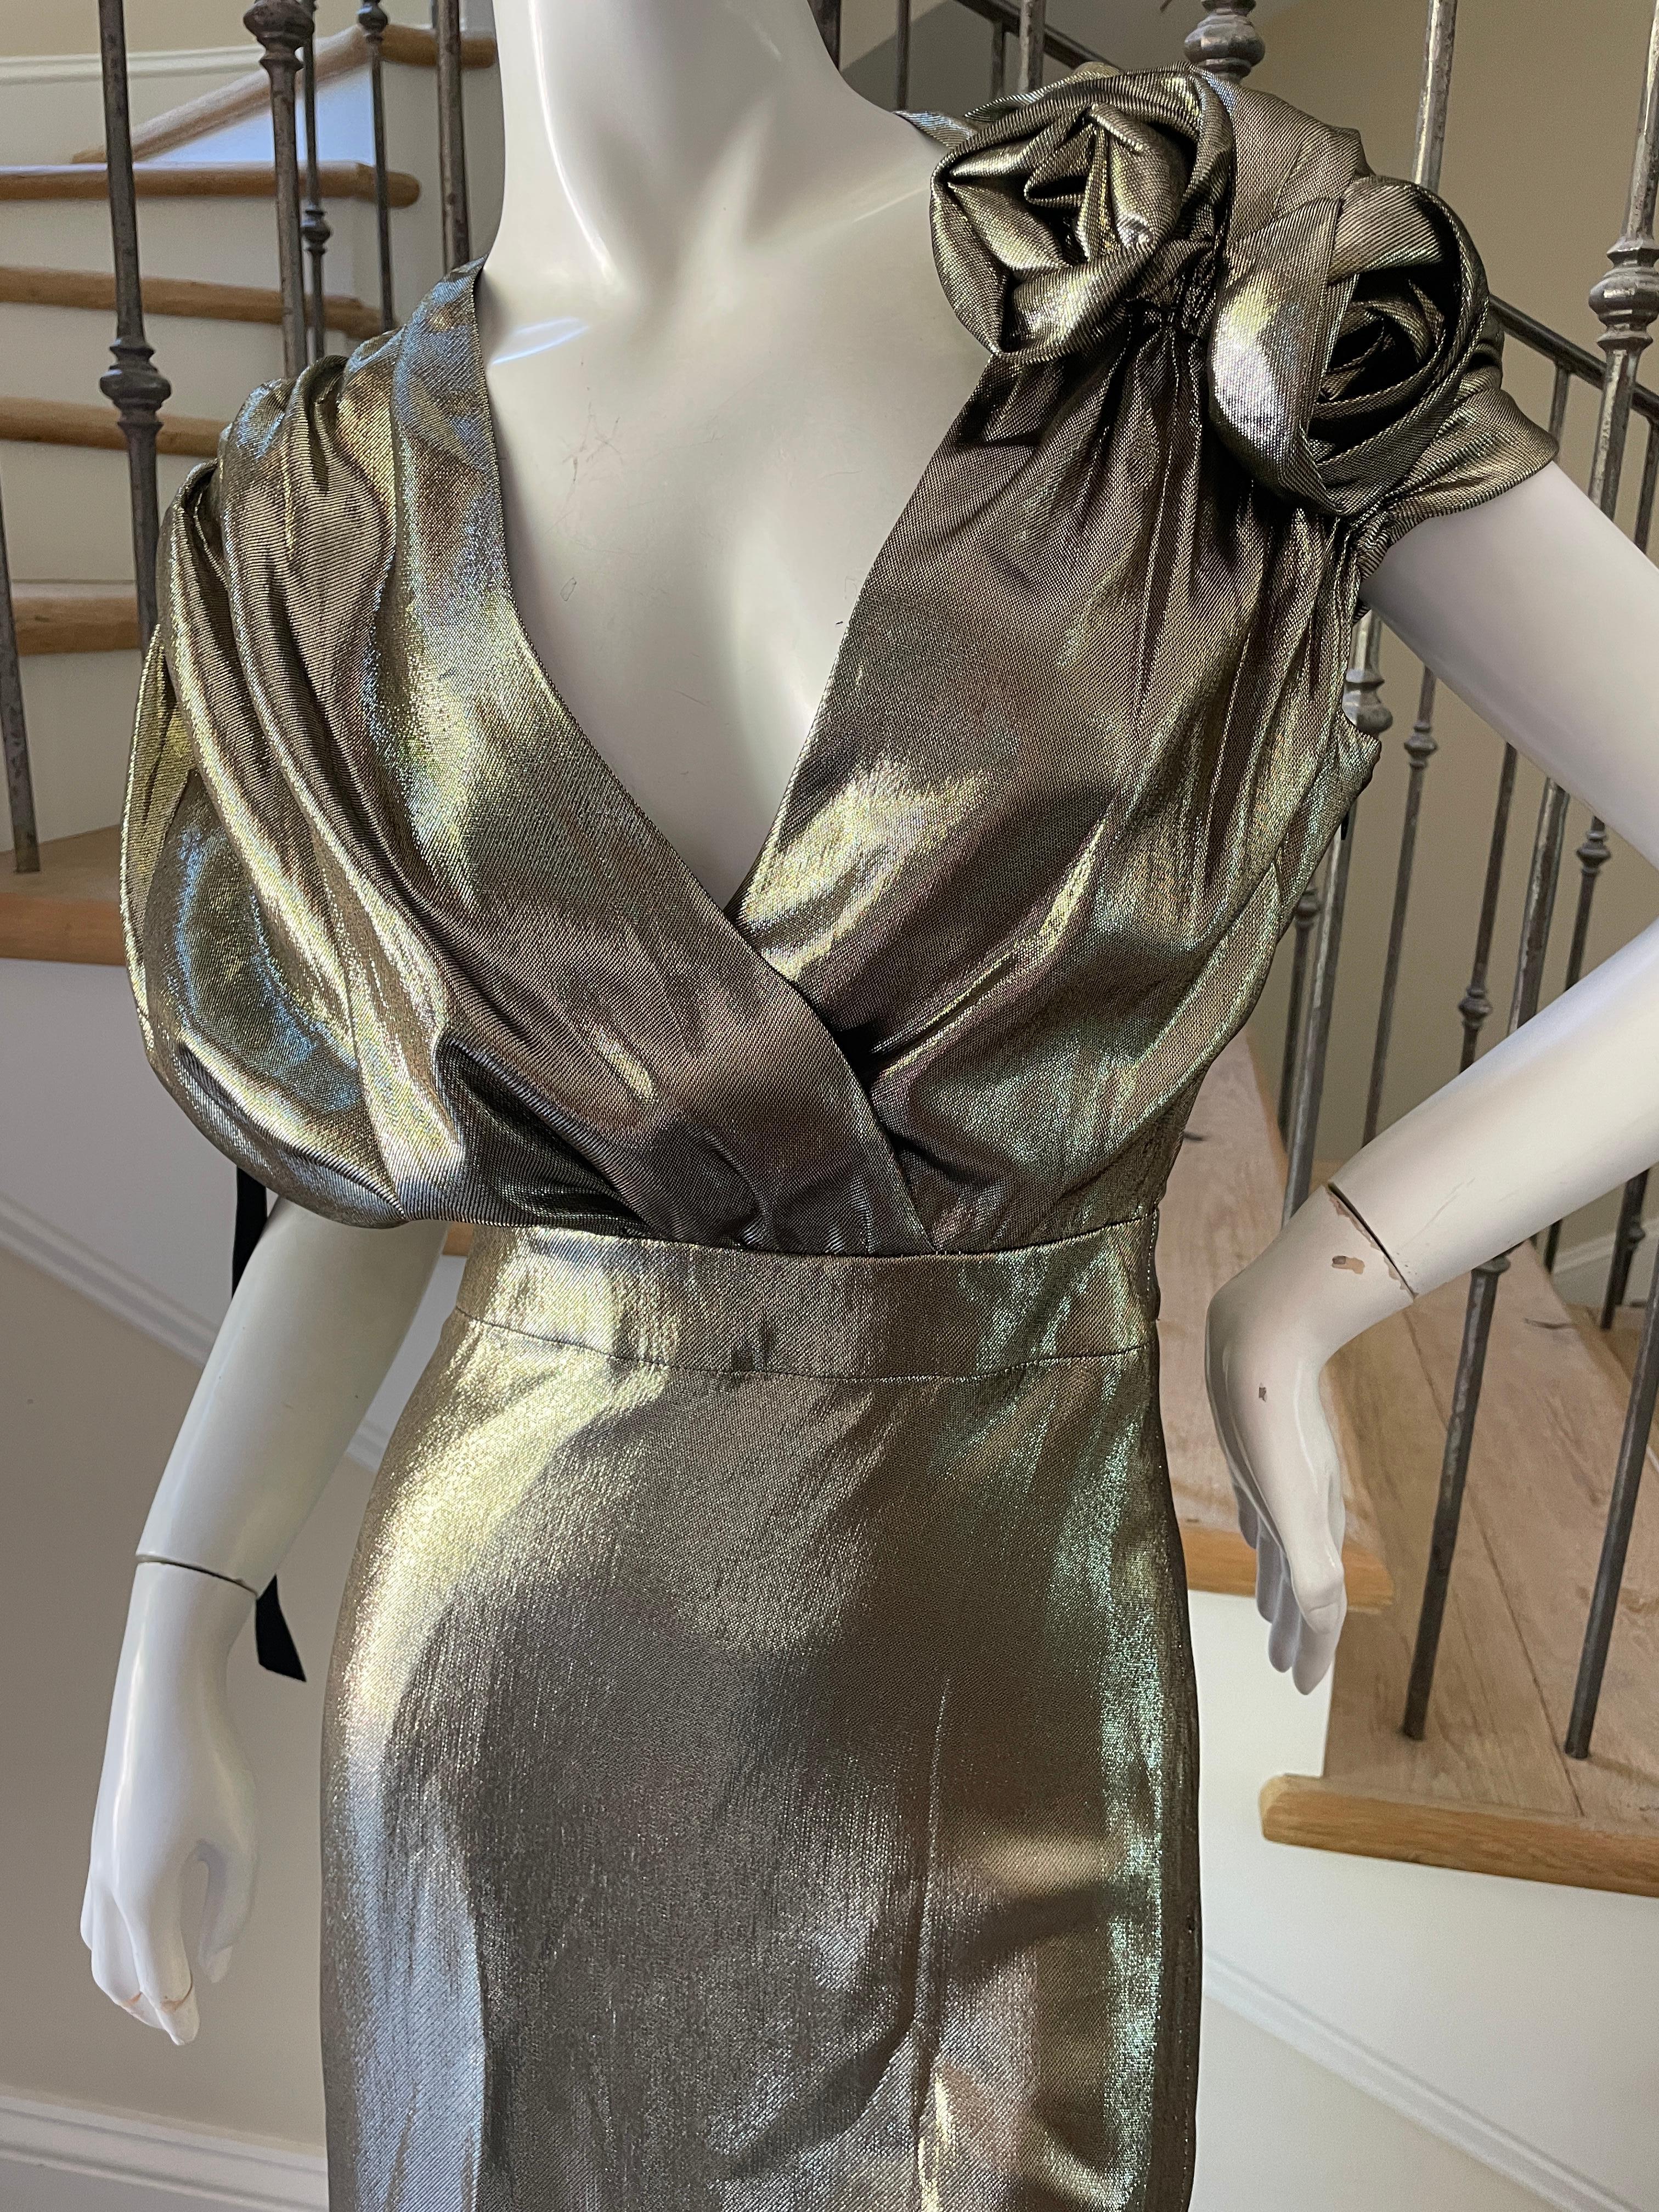 Lanvin by Alber Elbaz Metallic Gold Goddess Dress  In New Condition For Sale In Cloverdale, CA